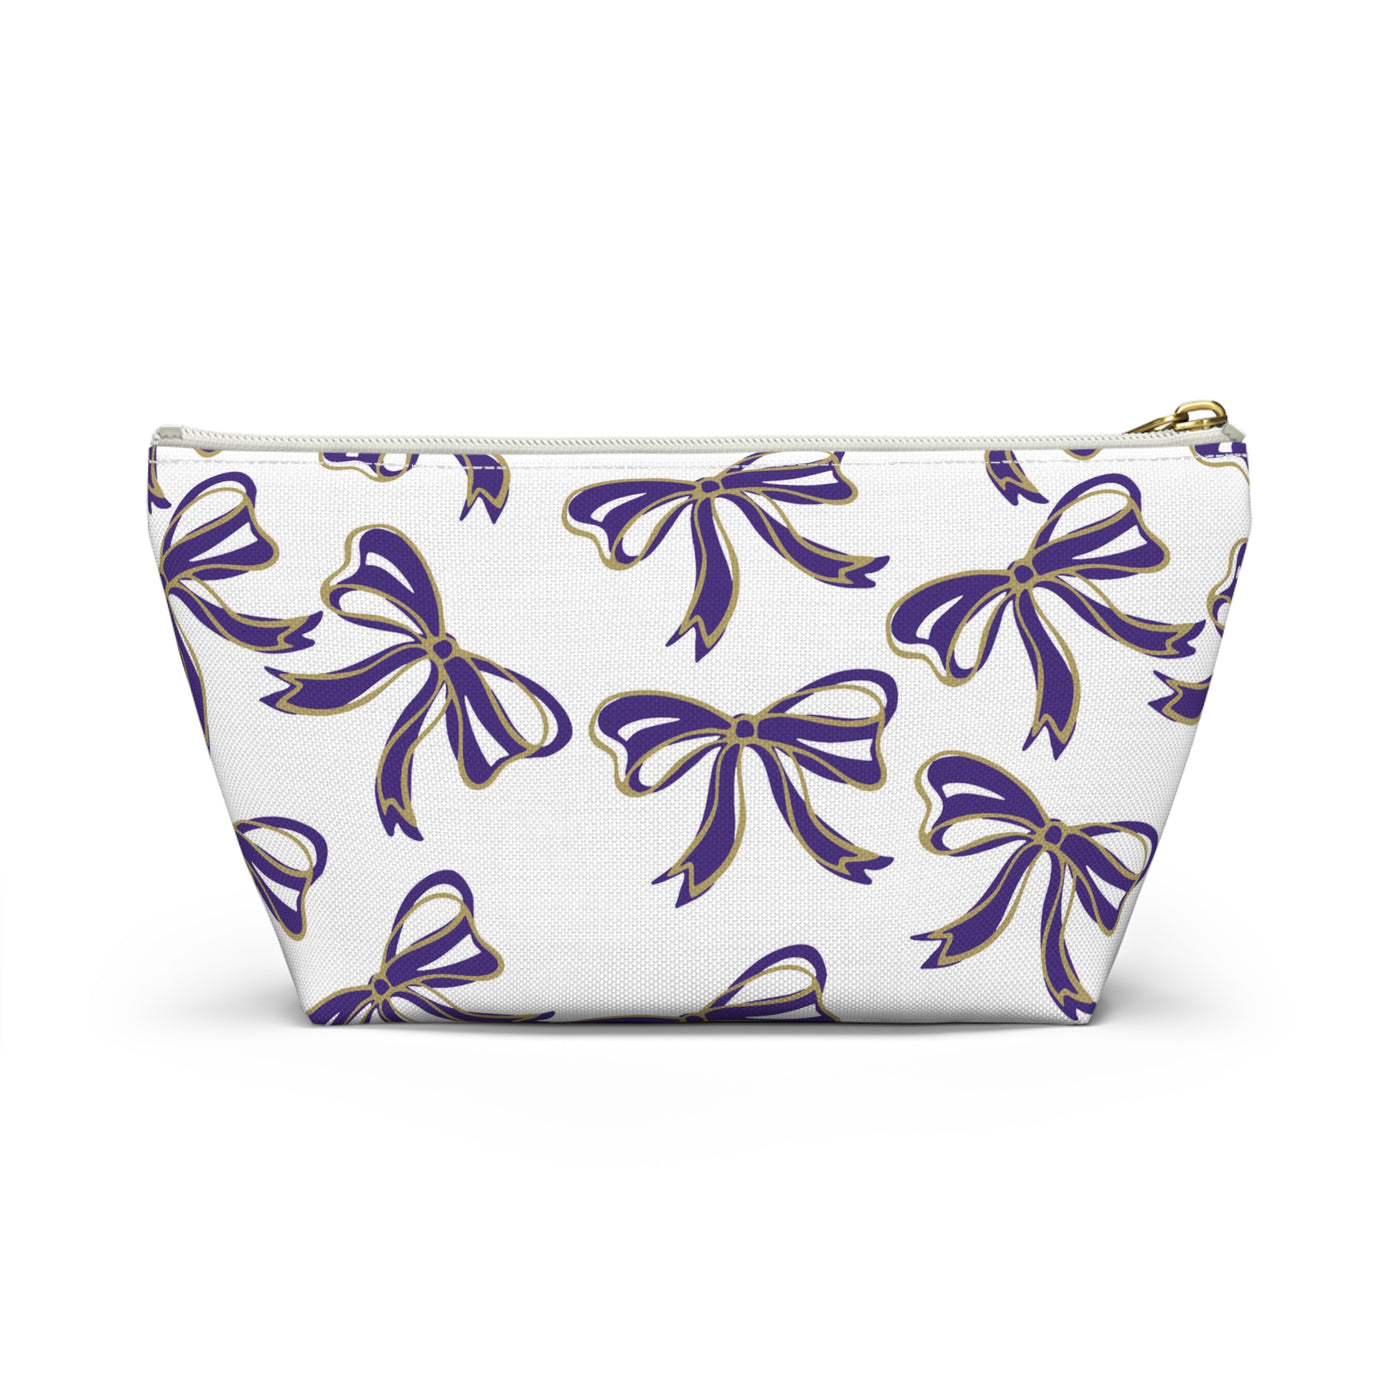 Copy of Trendy Bow Makeup Bag - Graduation Gift, Bed Party Gift, Acceptance Gift, College Gift, Purple and Gold, JMU Dukes, James Madison